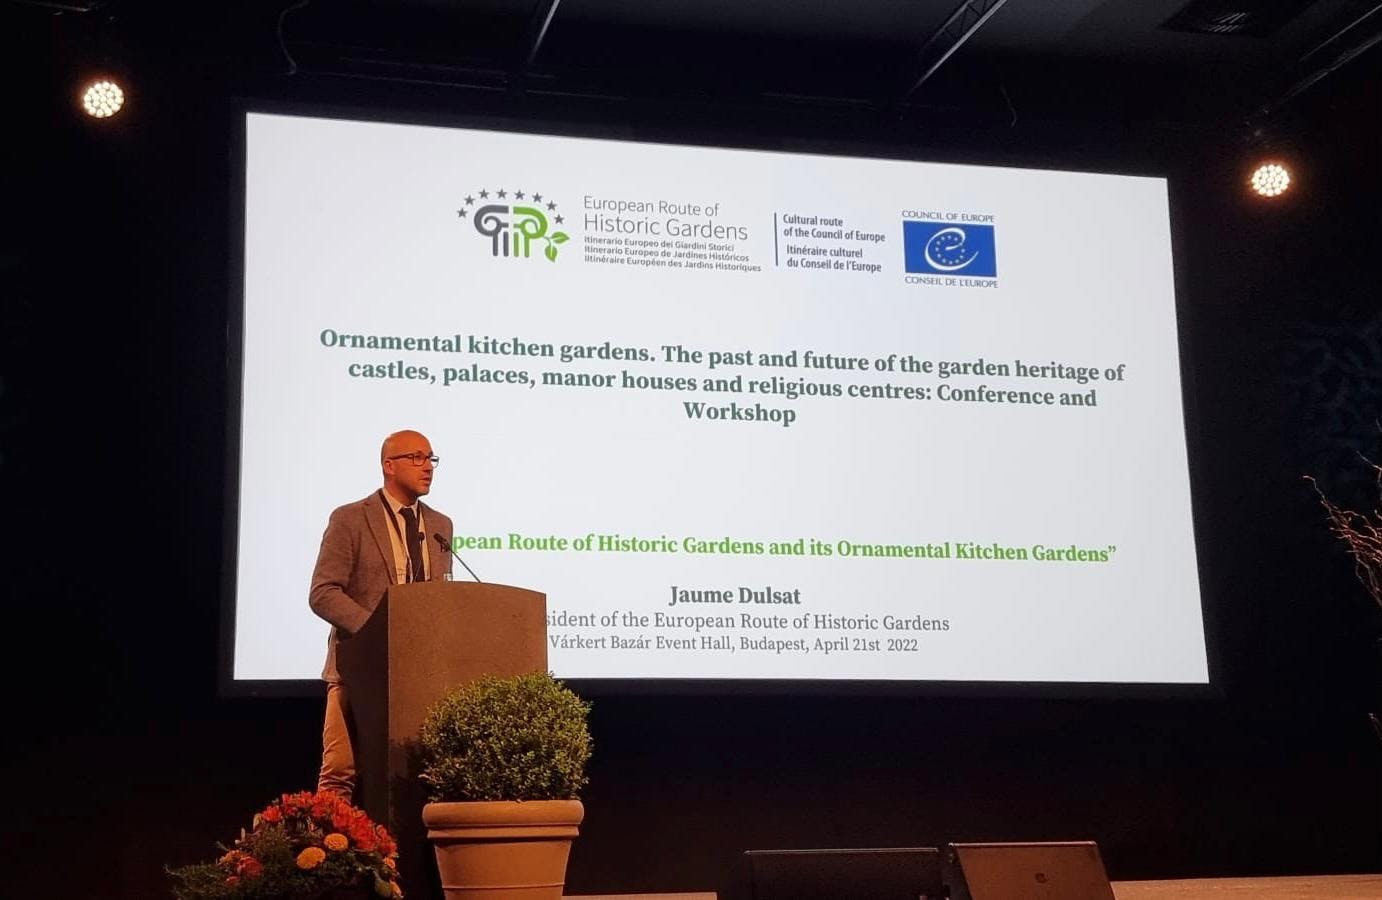 The ERHG participates at the Conference “Ornamental kitchen gardens. The past and future of the garden heritage of castles, palaces, manor houses and religious centres”